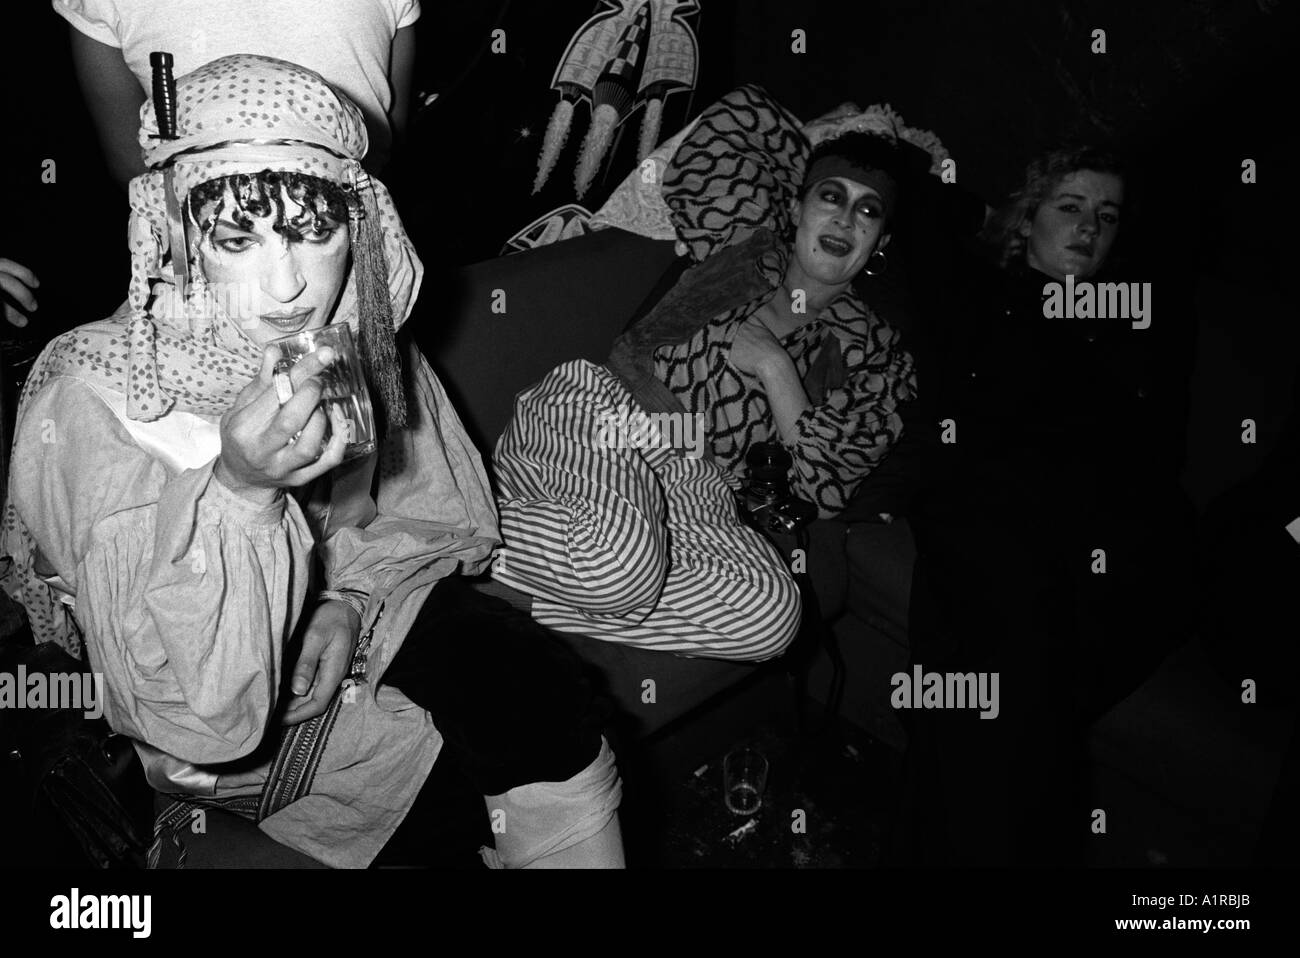 New Romantics at an under the arches night club nightclub Charring Cross central London England UK 1980s HOMER SYKES Stock Photo